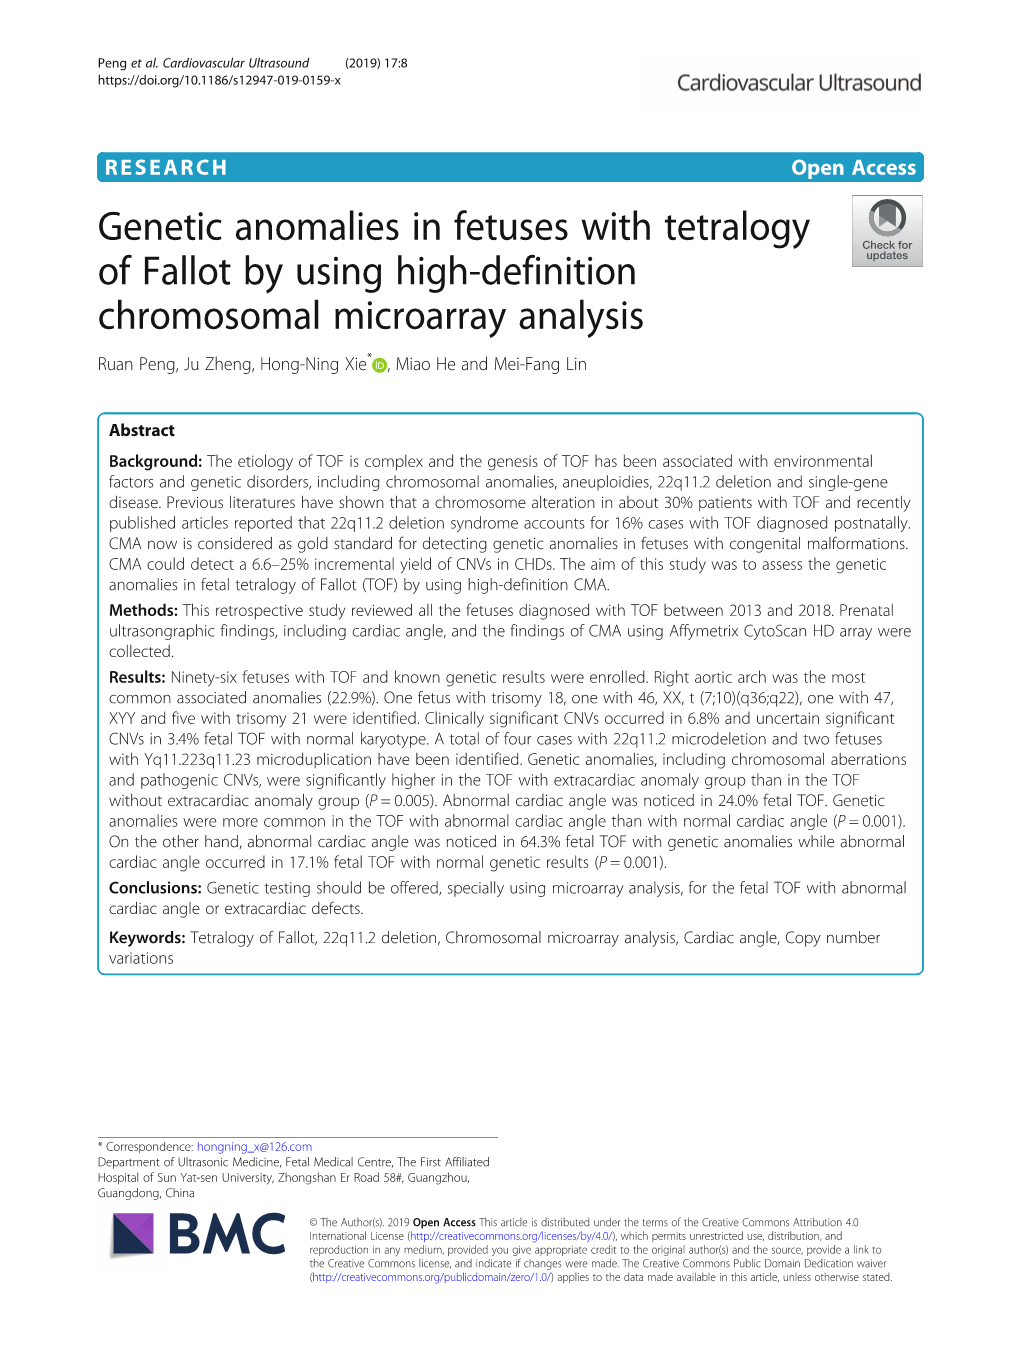 Genetic Anomalies in Fetuses with Tetralogy of Fallot by Using High